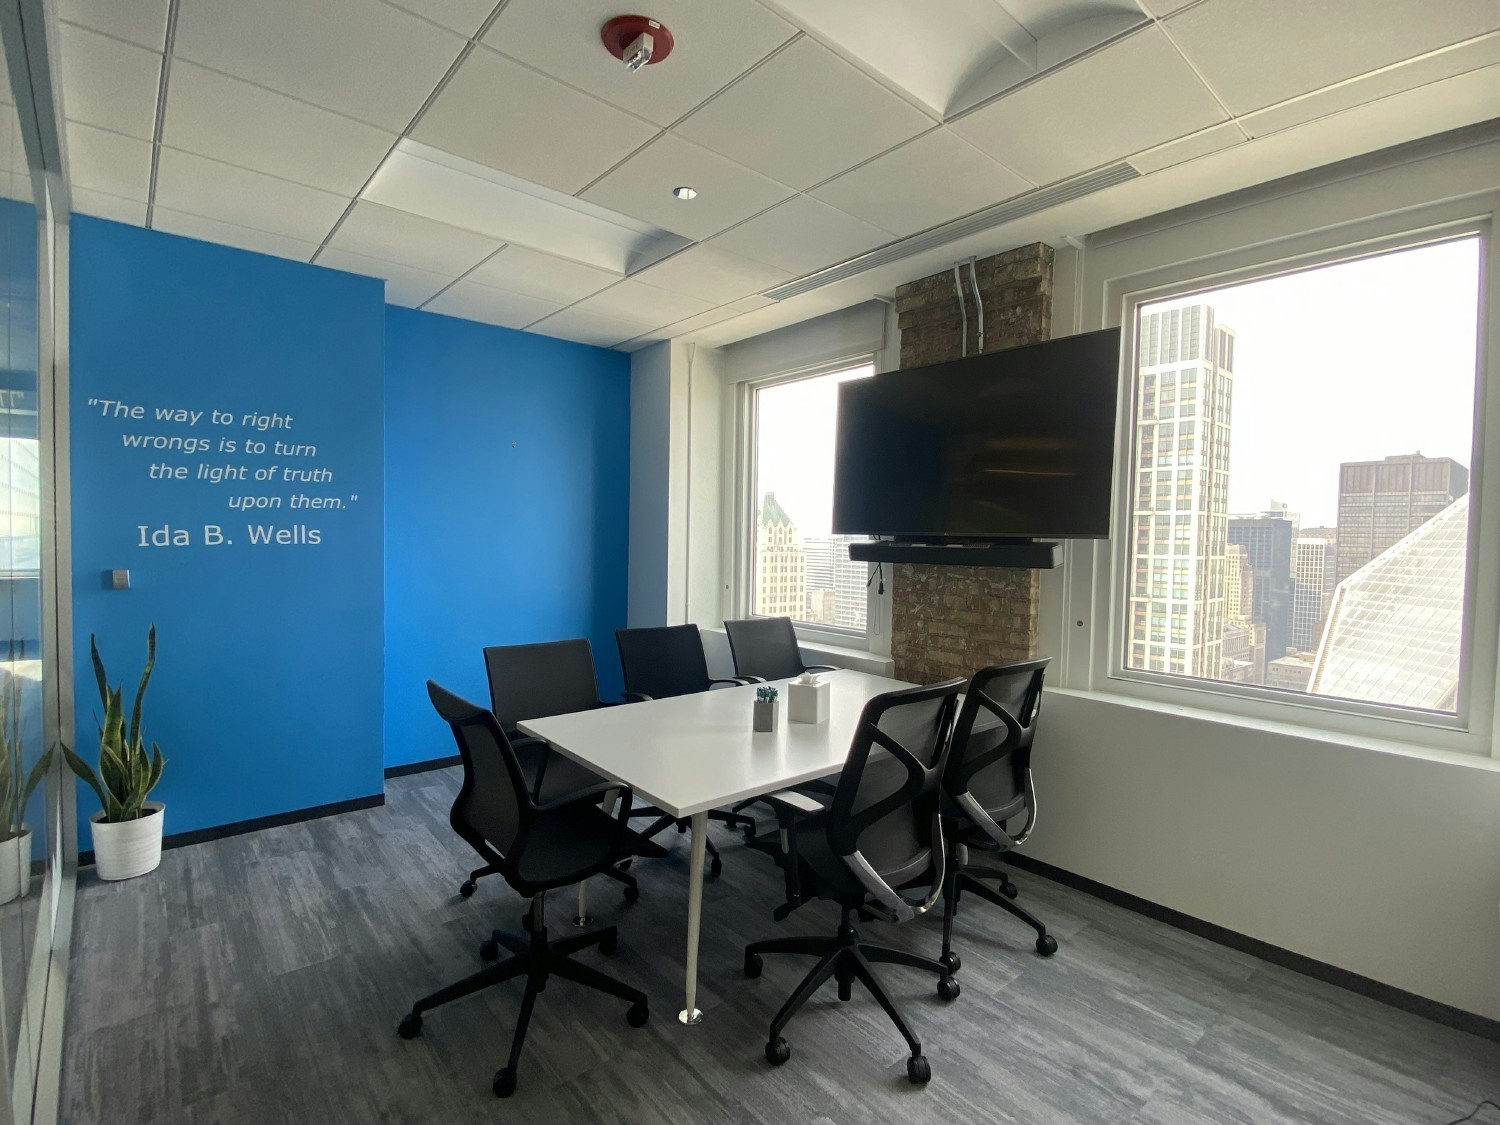 Just one of our many conference rooms.